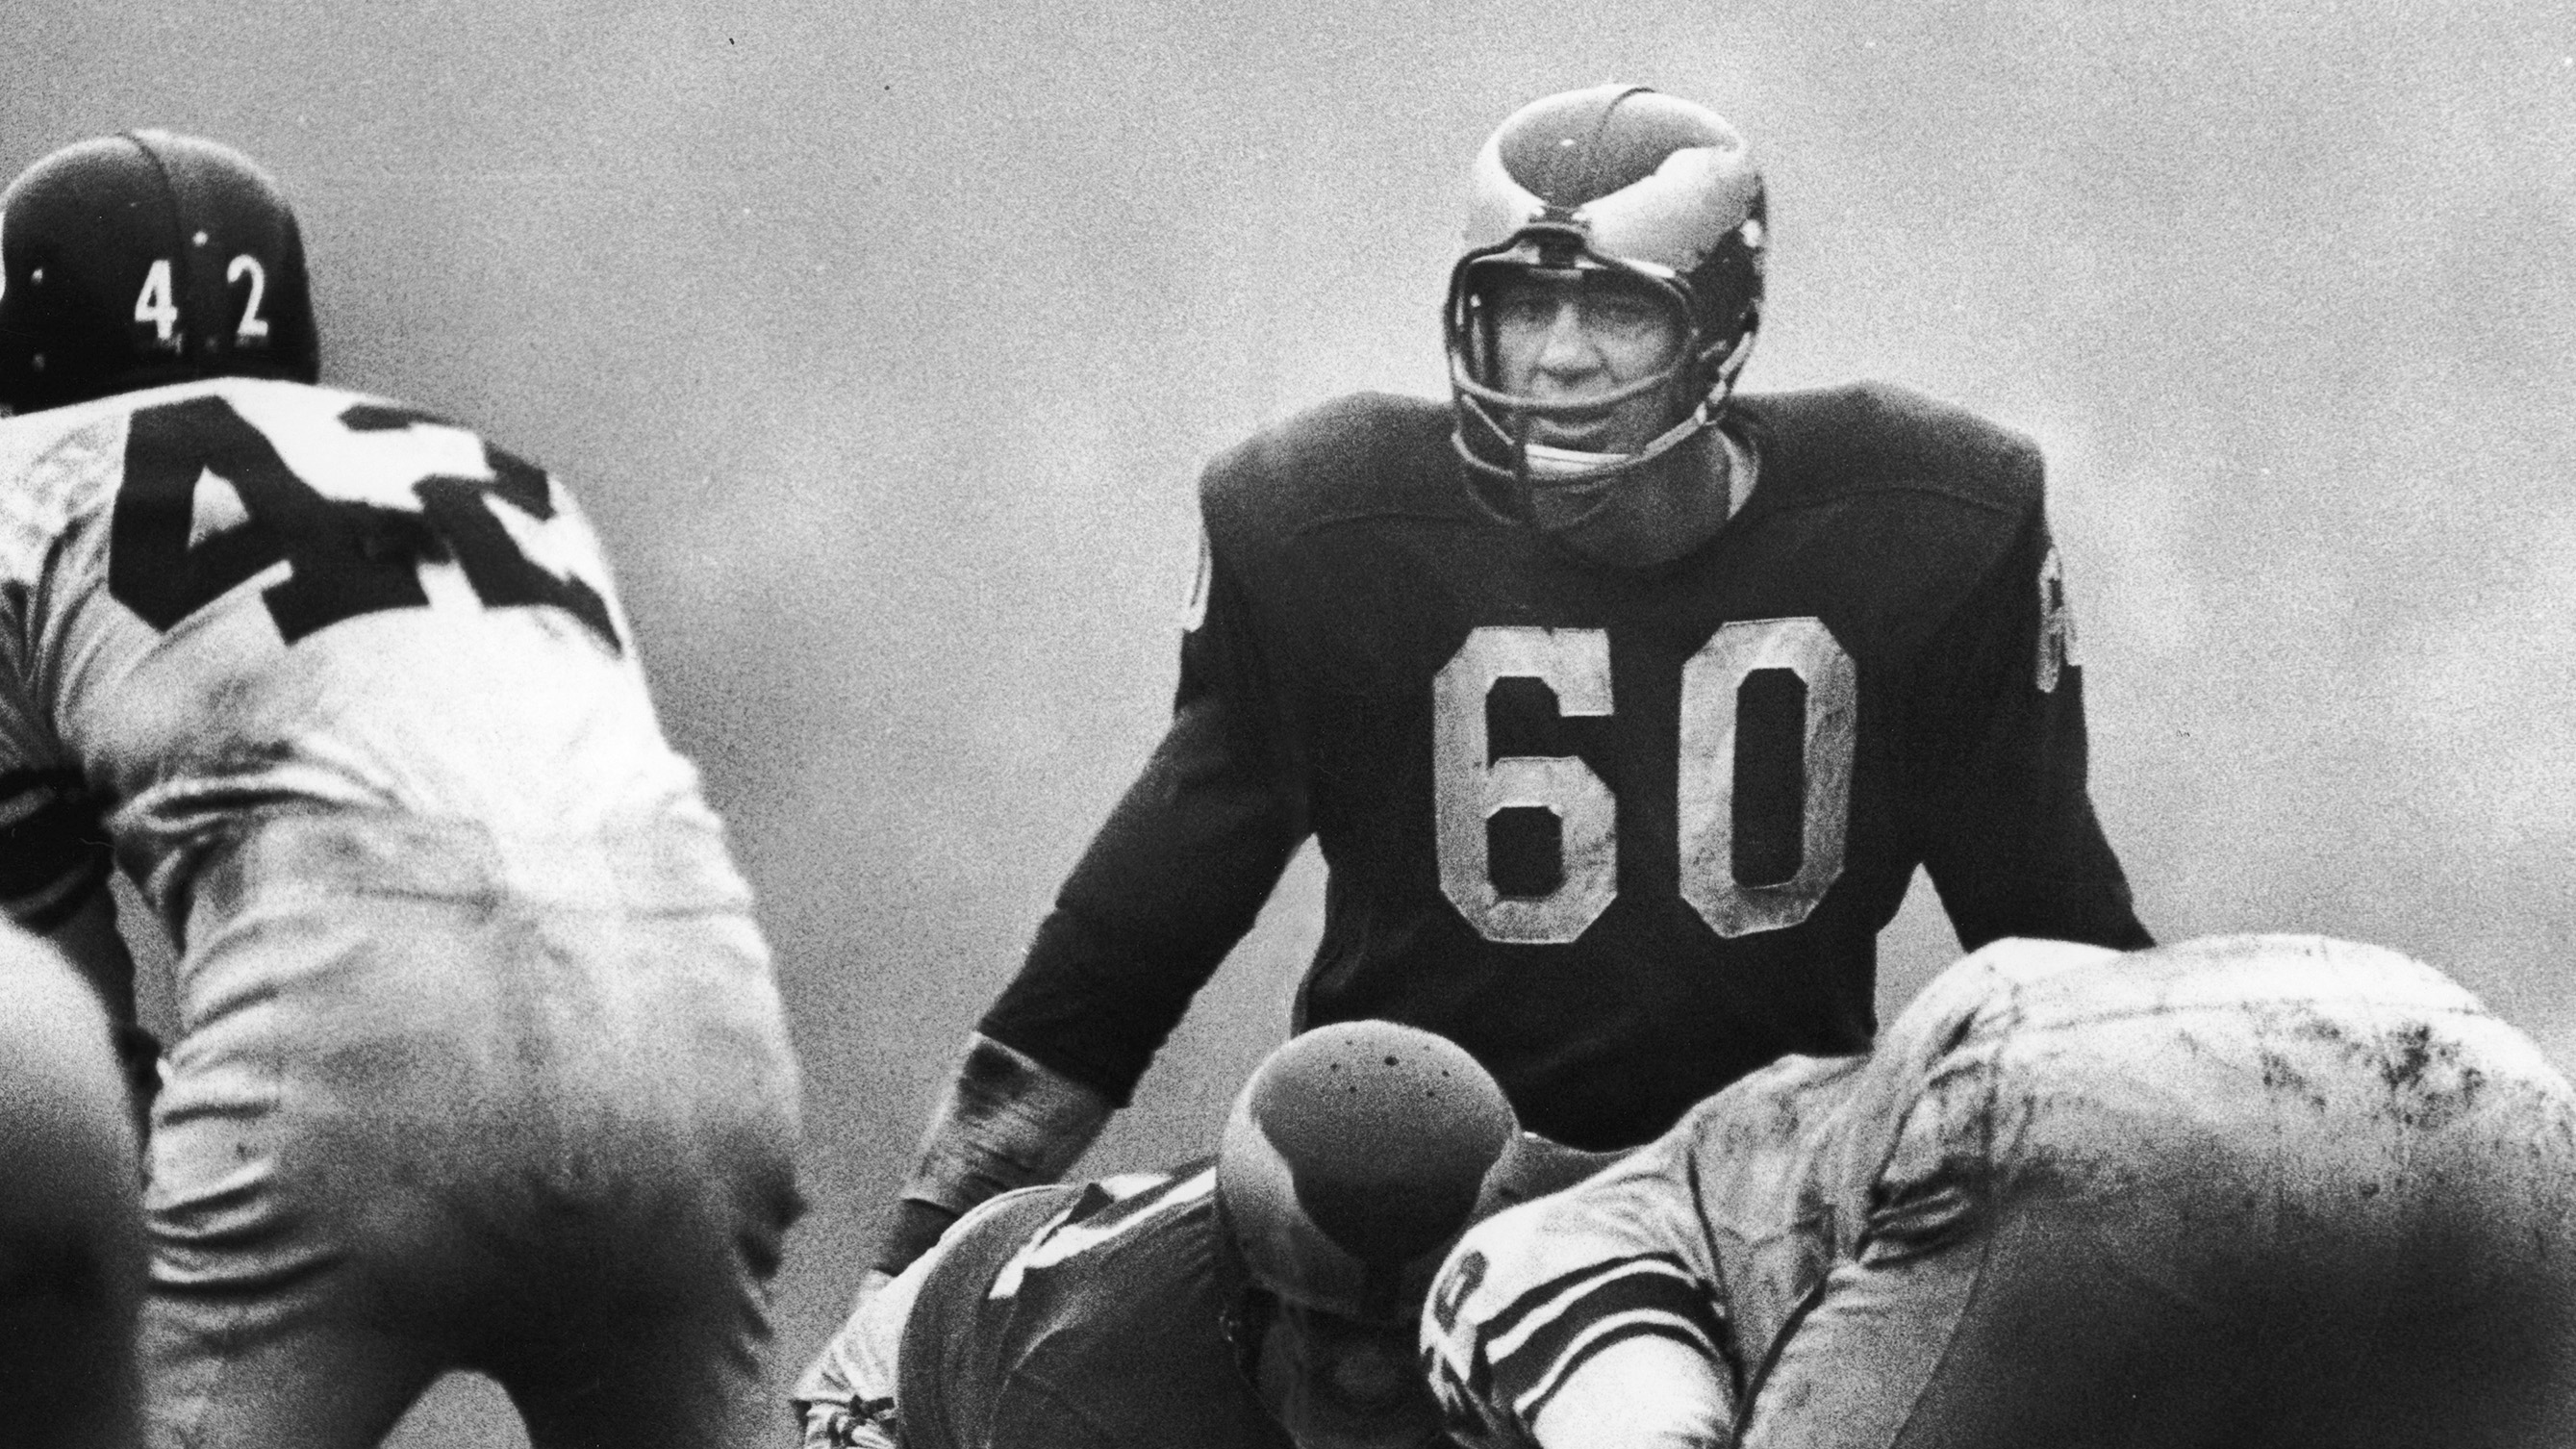 American football player Chuck Bednarik (#60) of the Philadelphia Eagles eyes his opponants as Charlie Conerly (#42), quarterback for the New York Giants prepares to take the ball during a game, late 1950s or early 1960s.